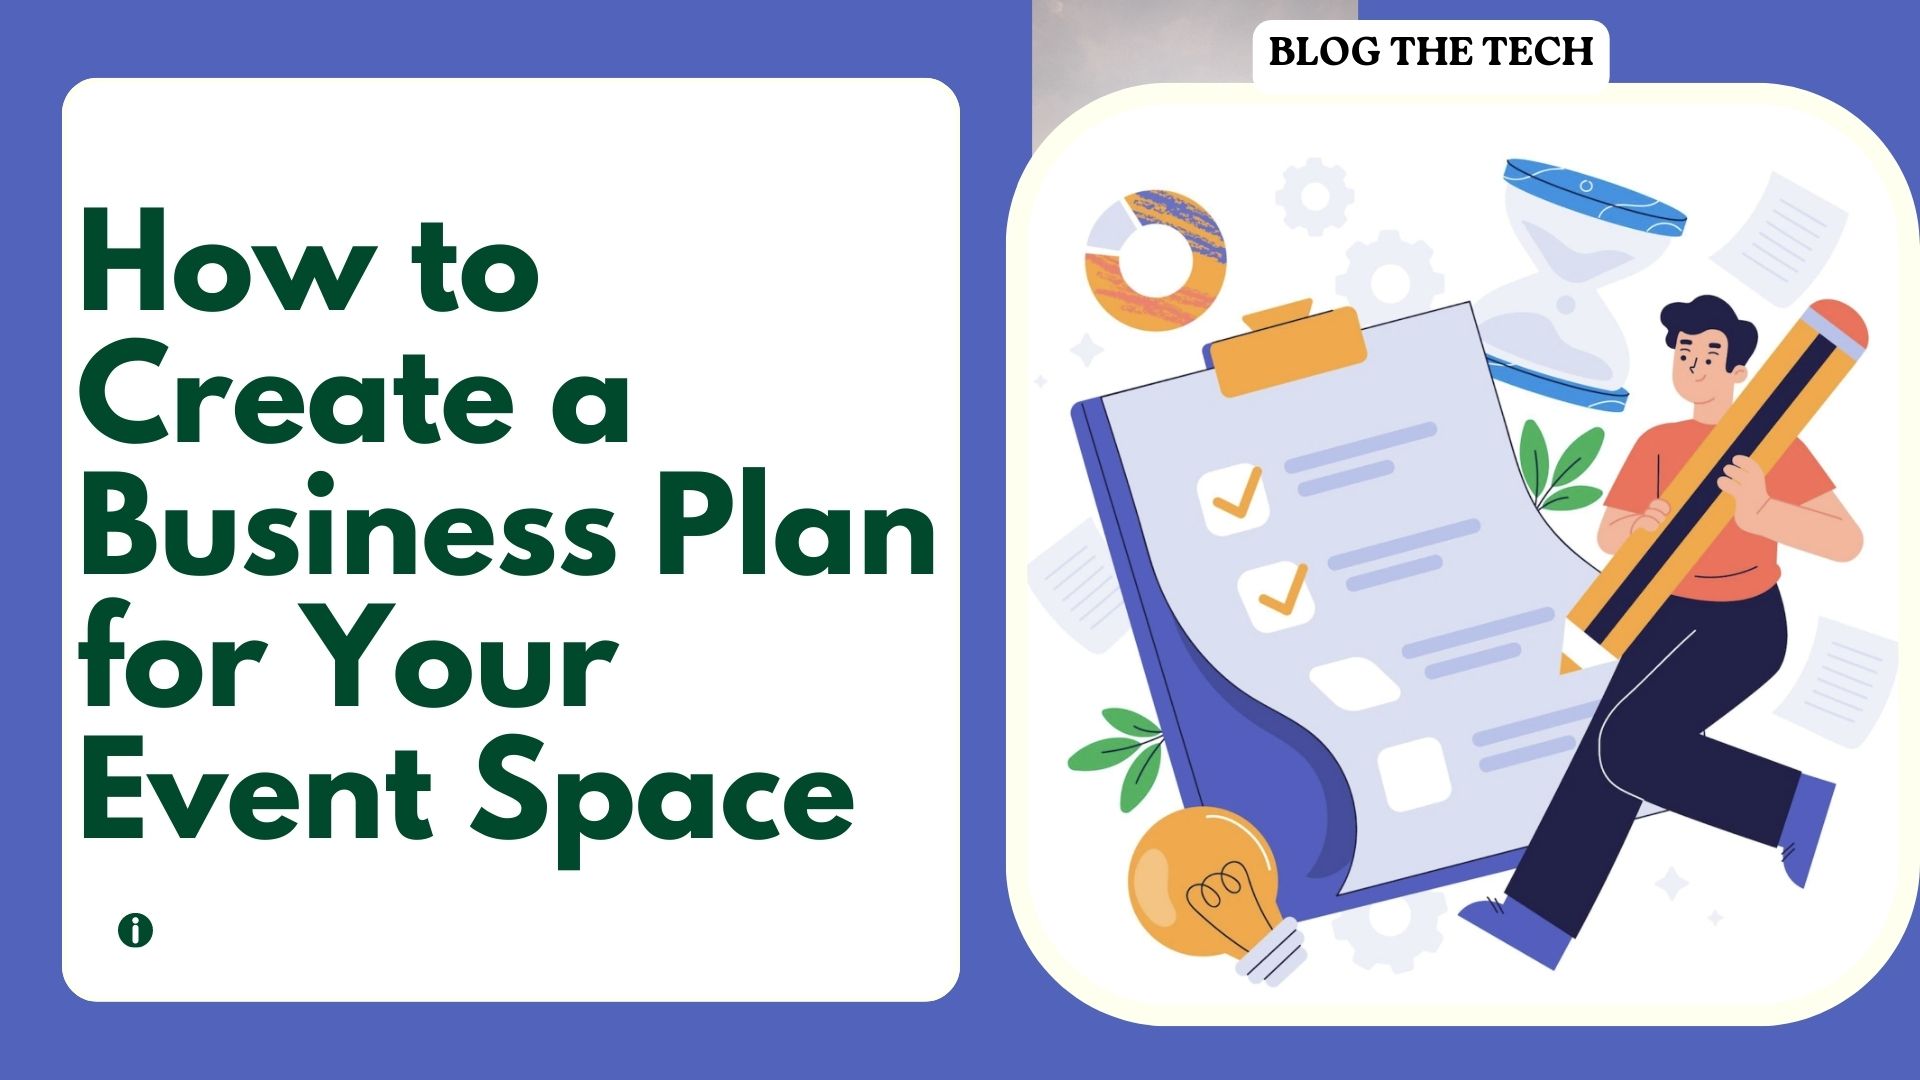 How to Create a Business Plan for Your Event Space